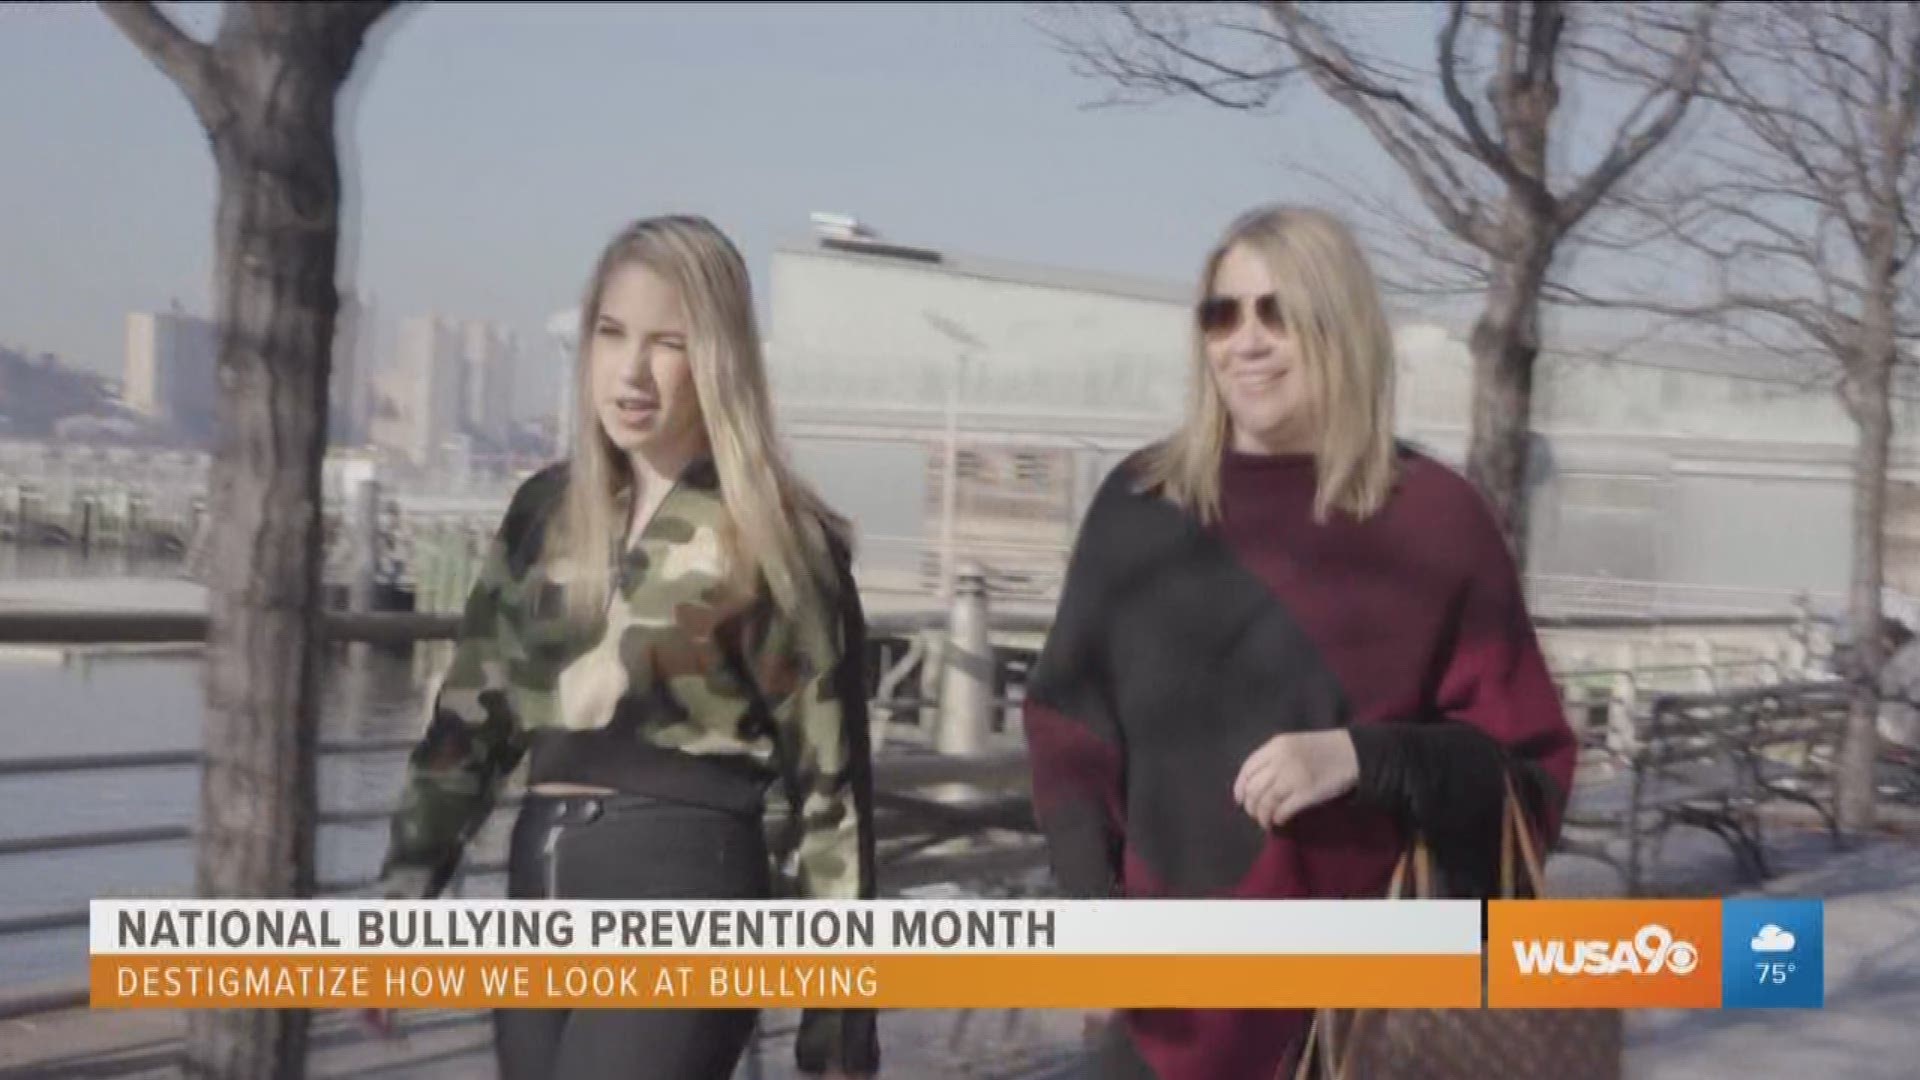 Tonya Harris and her daughter Lyndsey talk about bullying in school along with the stigma that still surrounds mental health and learning disabilities.